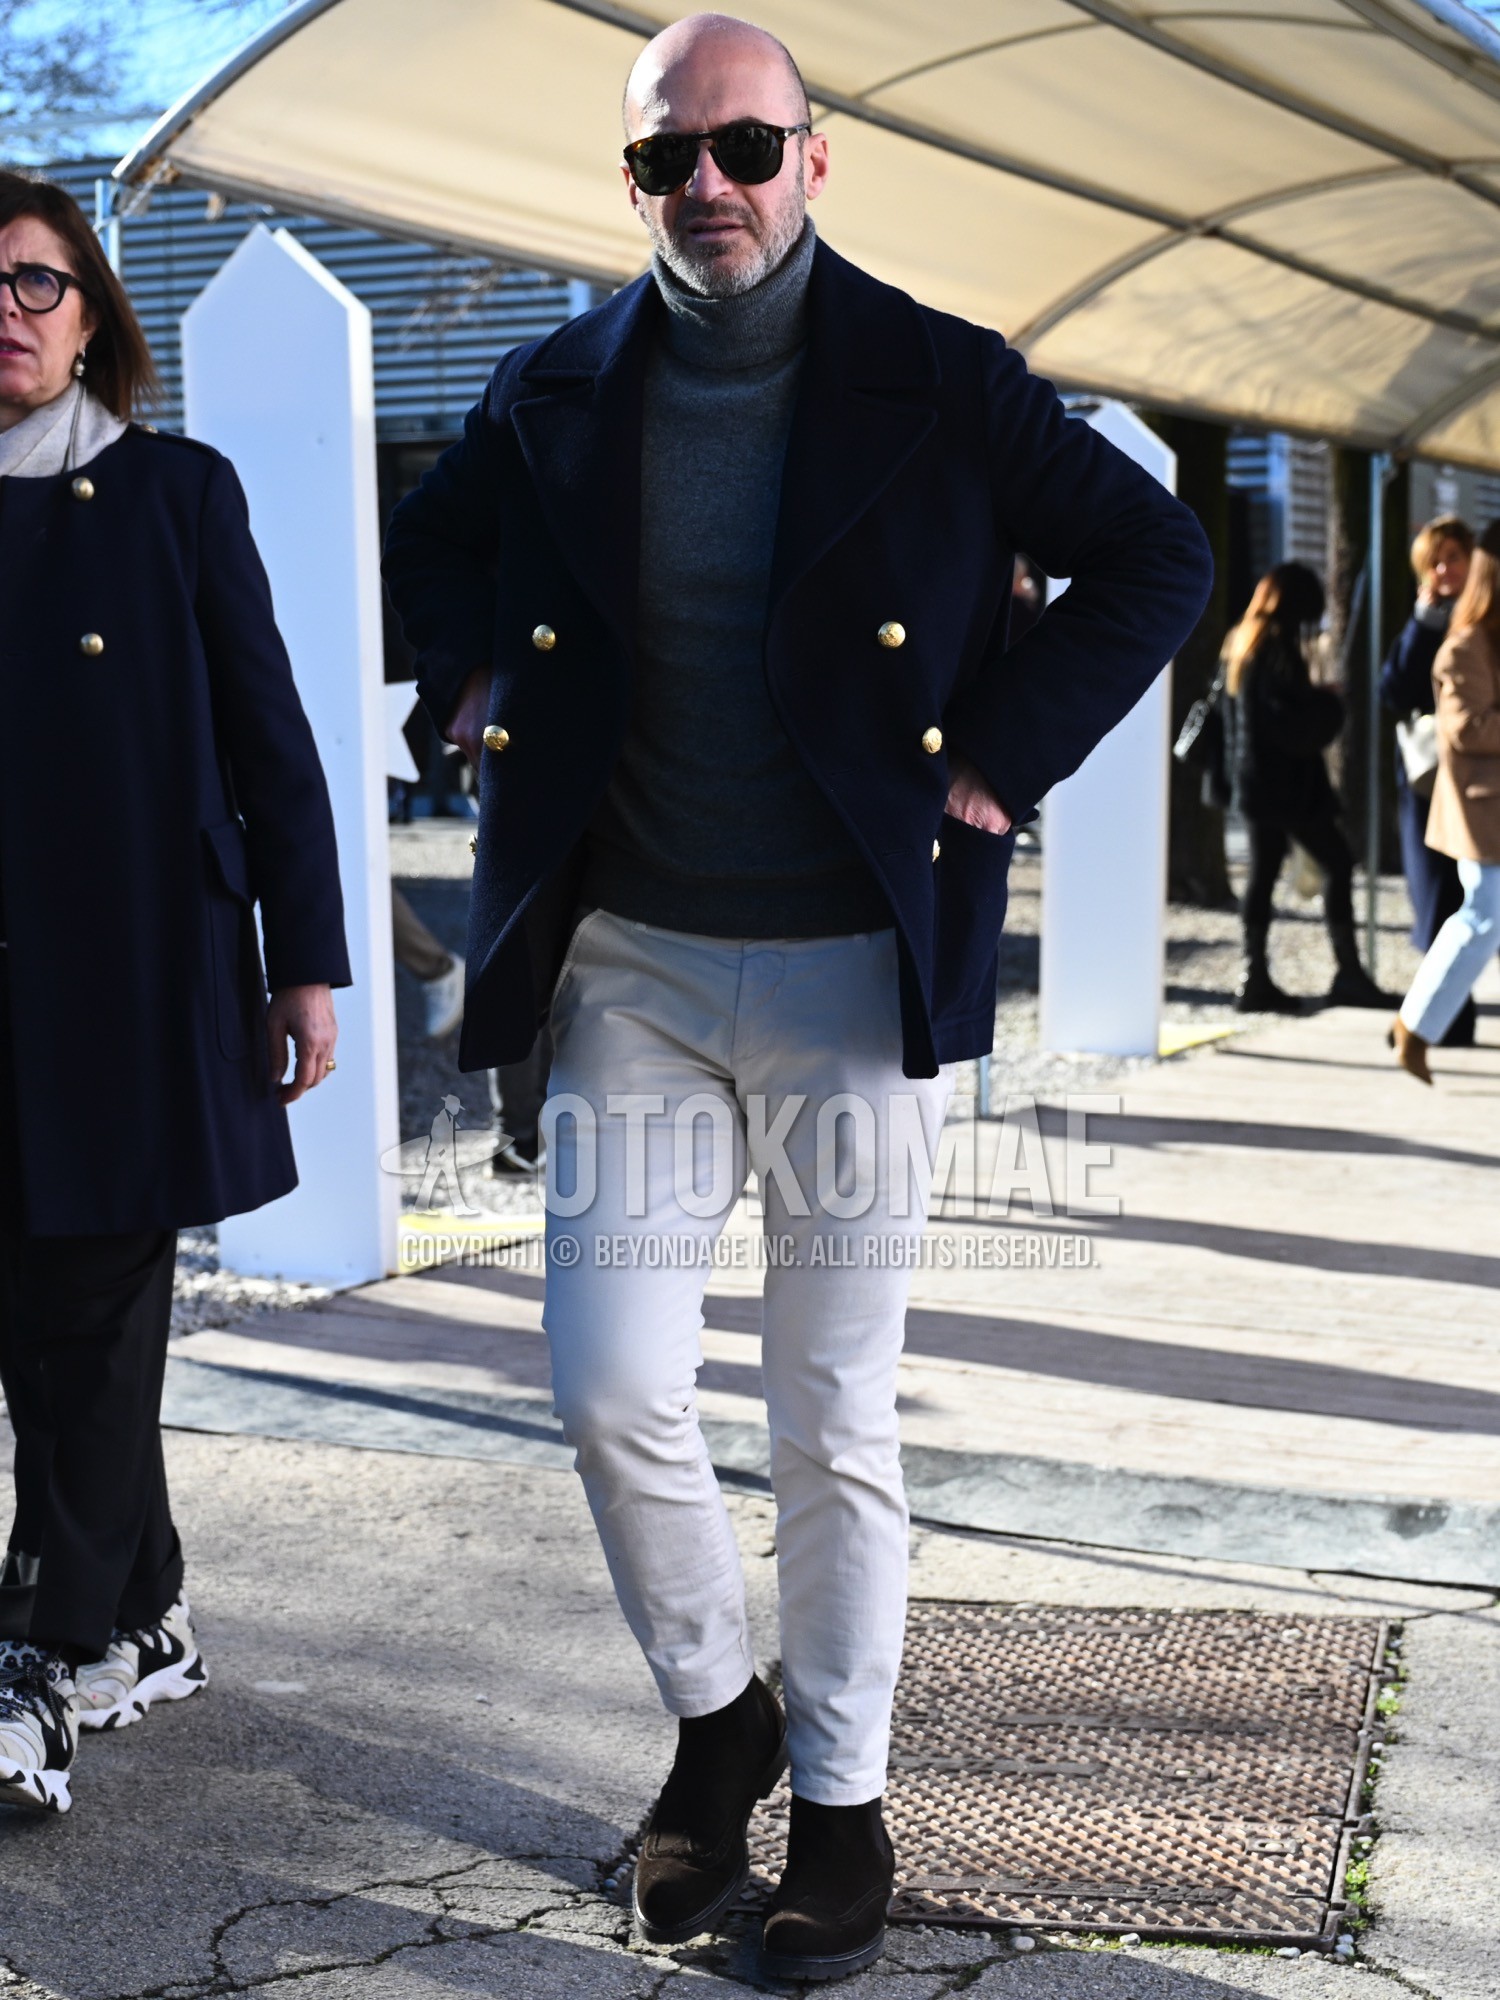 Men's spring autumn winter outfit with brown tortoiseshell sunglasses, navy plain ulster coat, gray plain turtleneck knit, white plain chinos, brown side-gore boots.